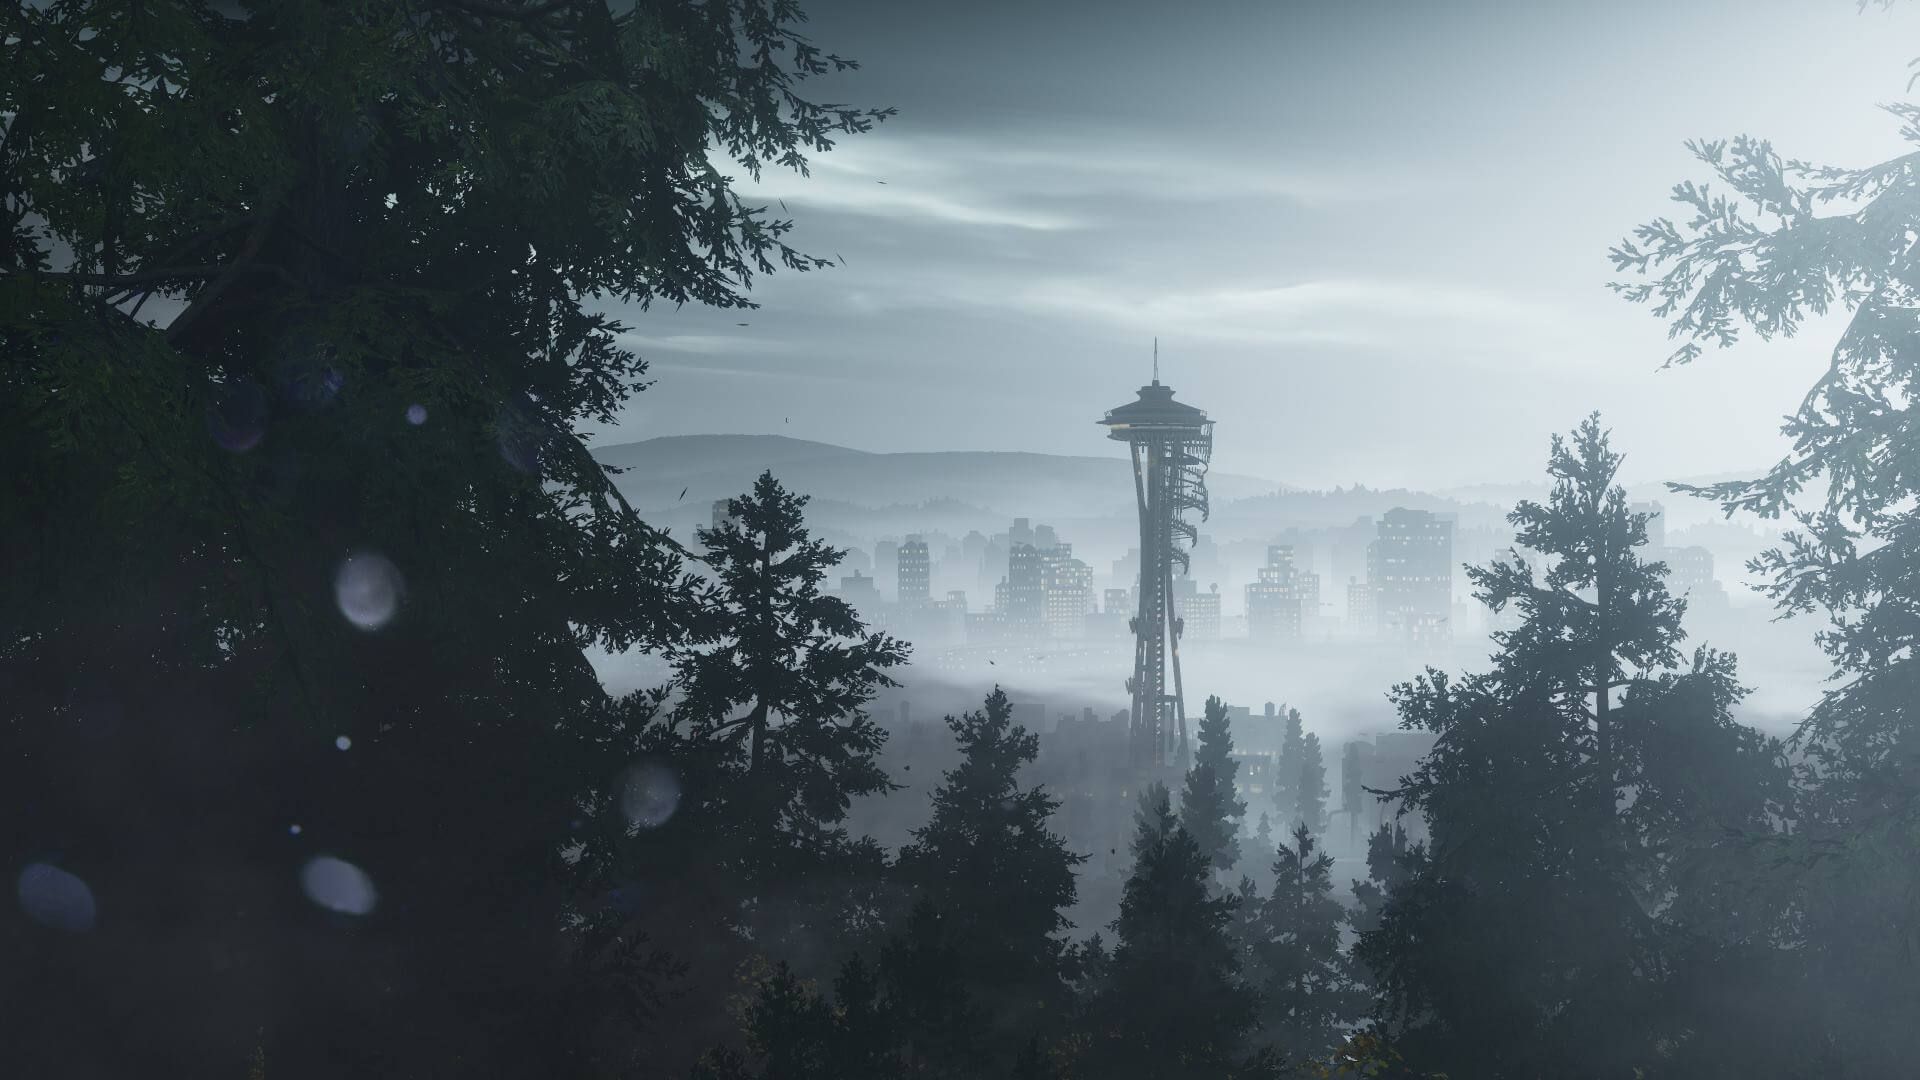 inFAMOUS Second Son screenshot - Seattle skyline through trees